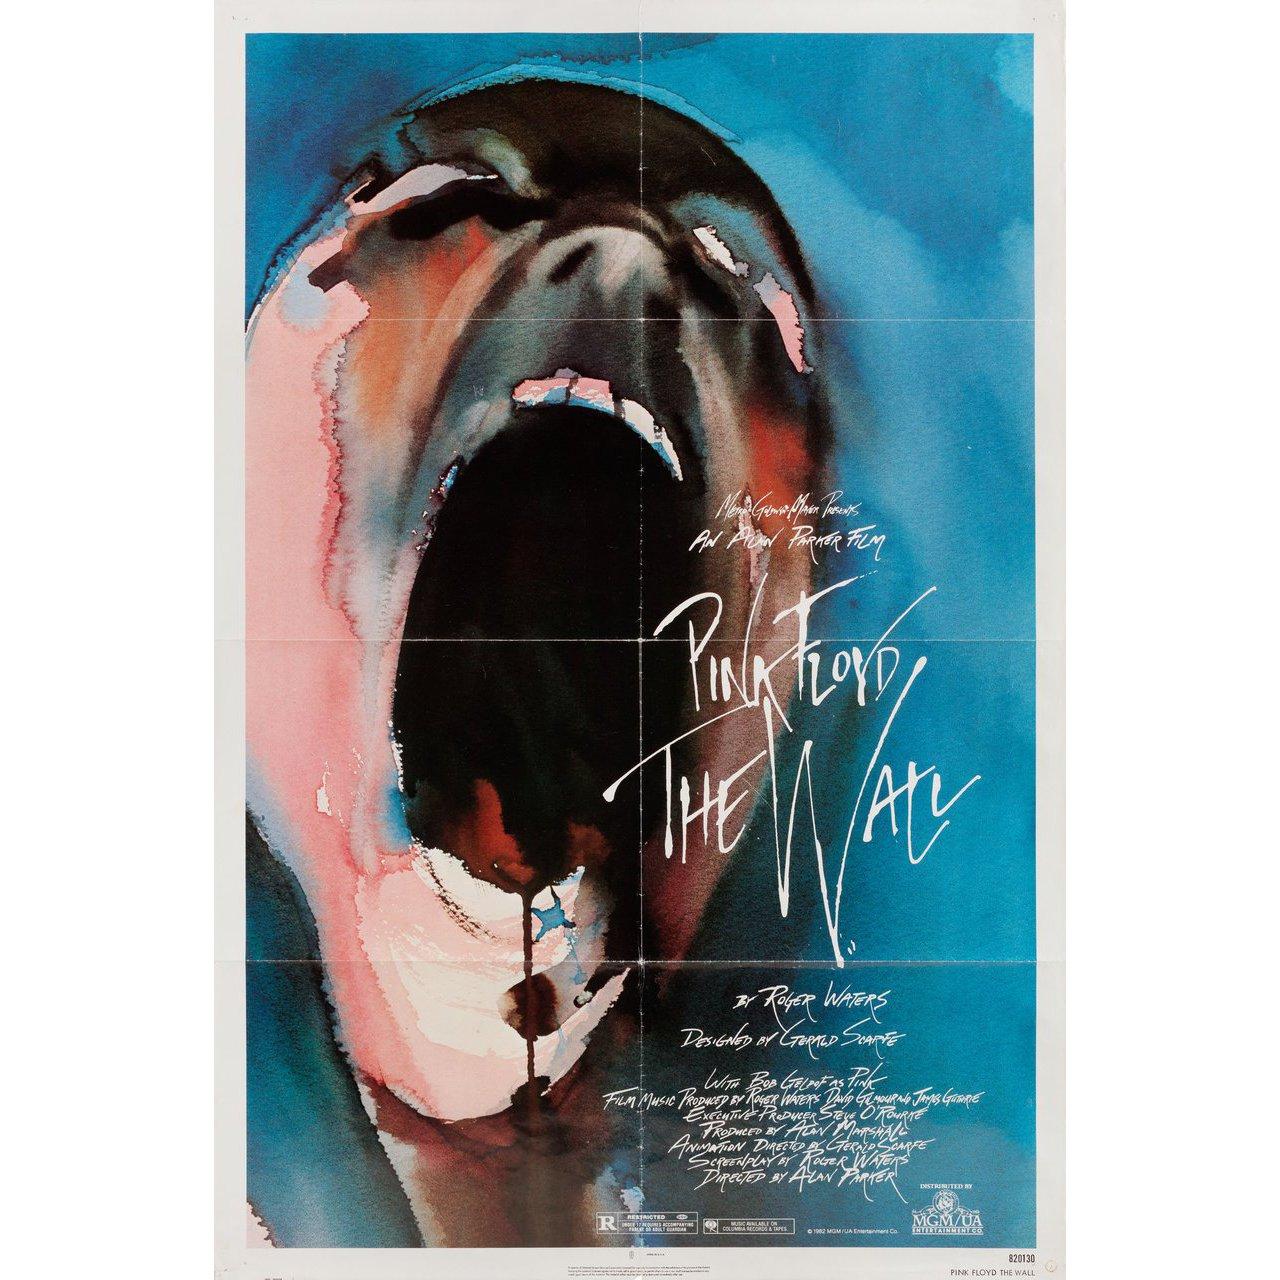 Original 1982 U.S. one sheet poster by Gerald Scarfe for the film Pink Floyd The Wall directed by Alan Parker with Bob Geldof / Christine Hargreaves / James Laurenson / Eleanor David. Very Good-Fine condition, folded with slight fold & edgewear.